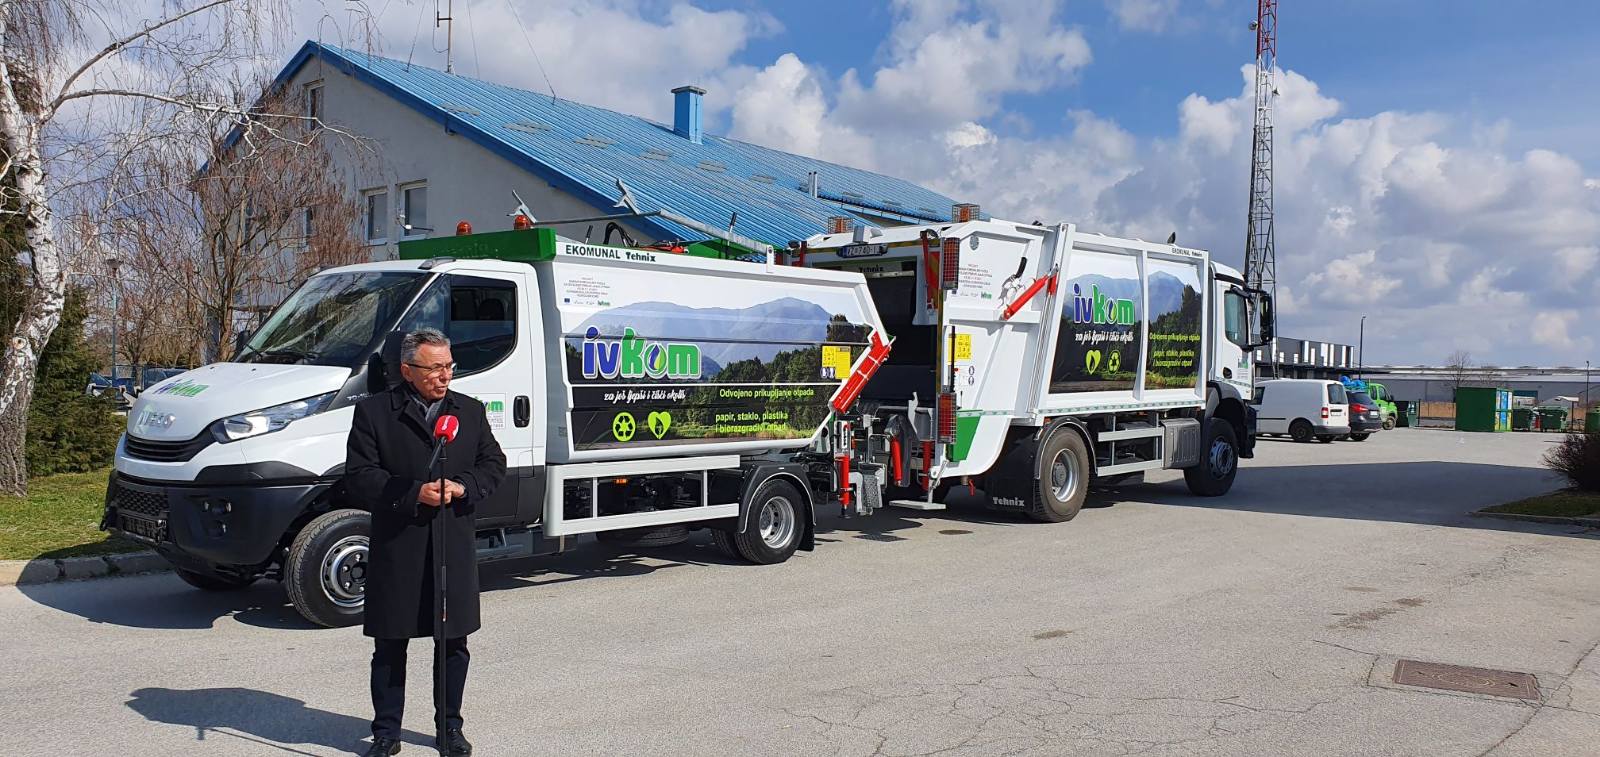 Delivery of Second Vehicle for Ivkom Ivanec